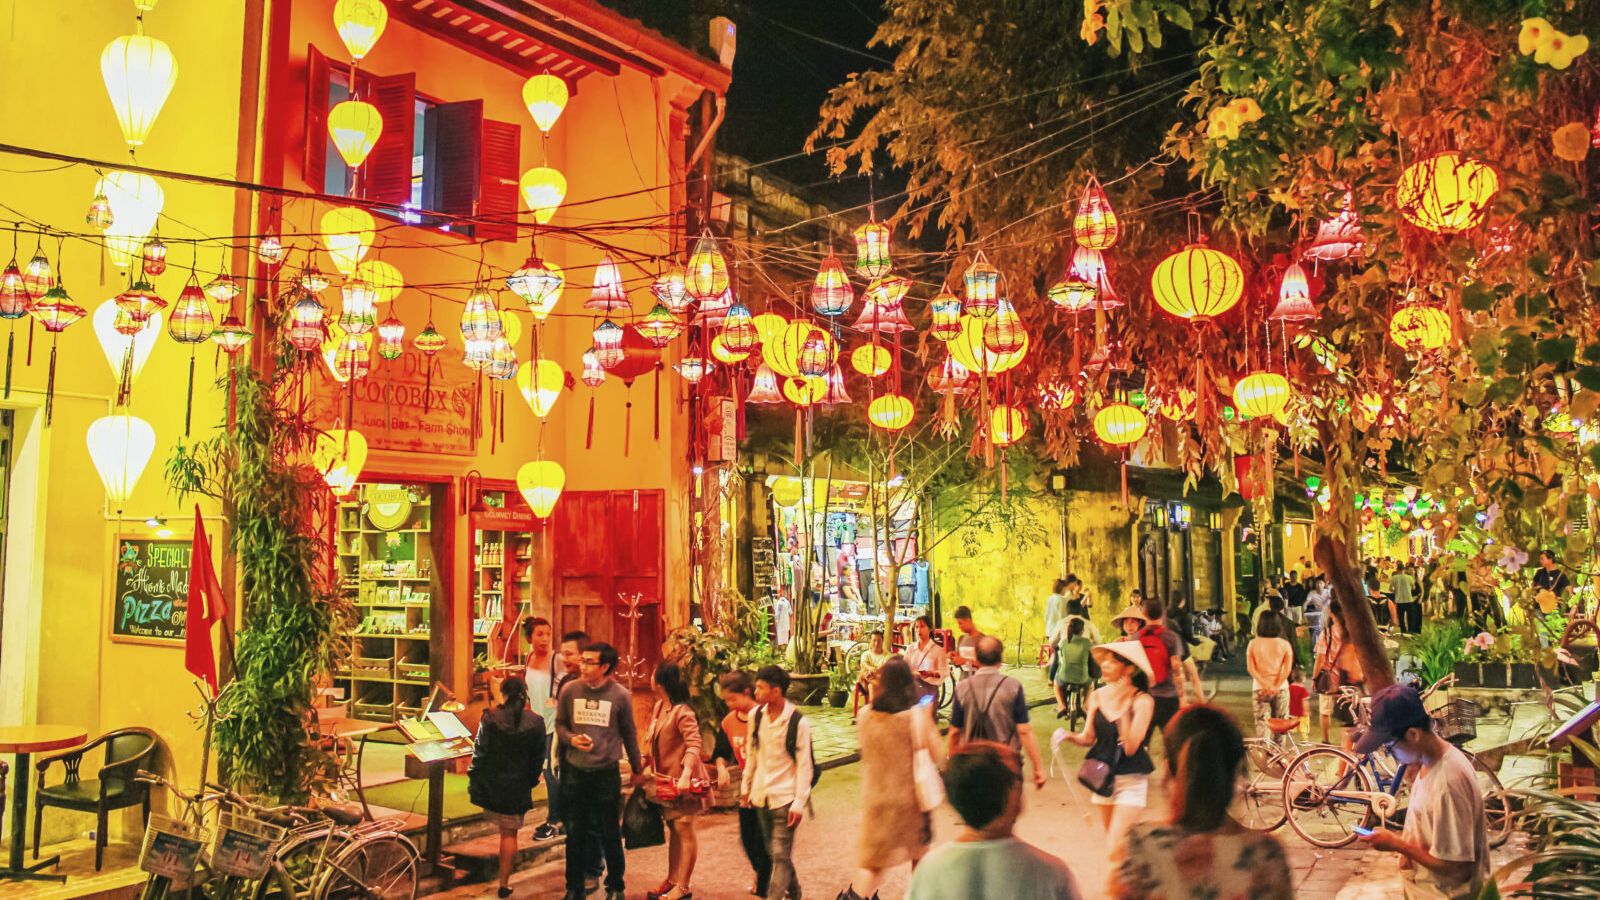 Day 5-7 Immerse Yourself In The Sparking Town Of Hoian